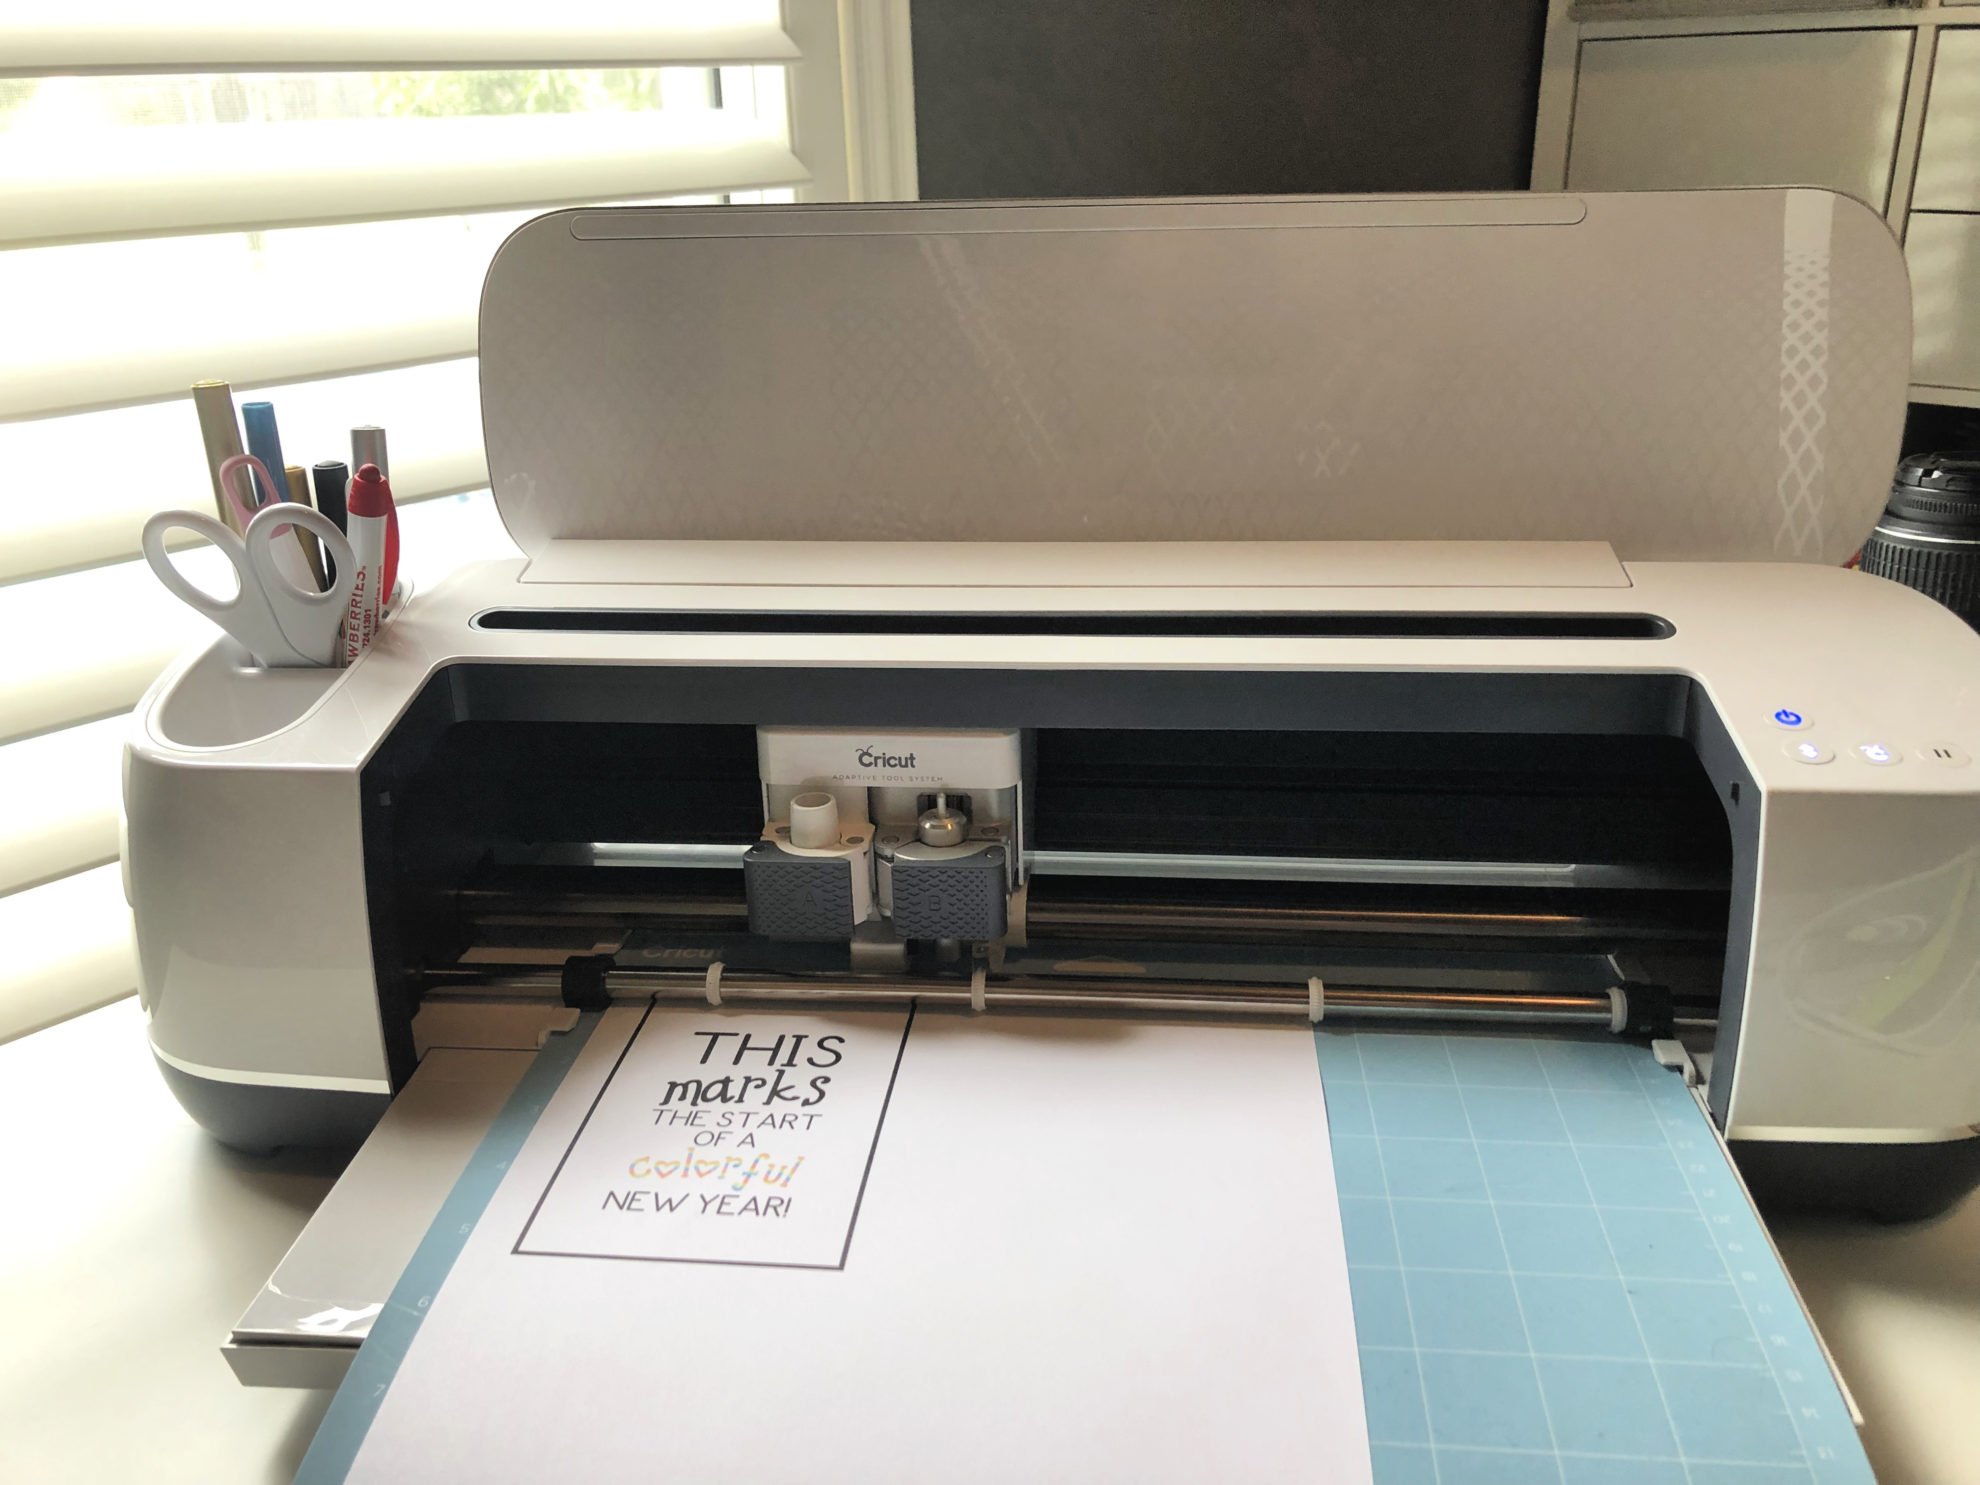 Cricut Maker with blue mat loaded and paper with printed design on paper.